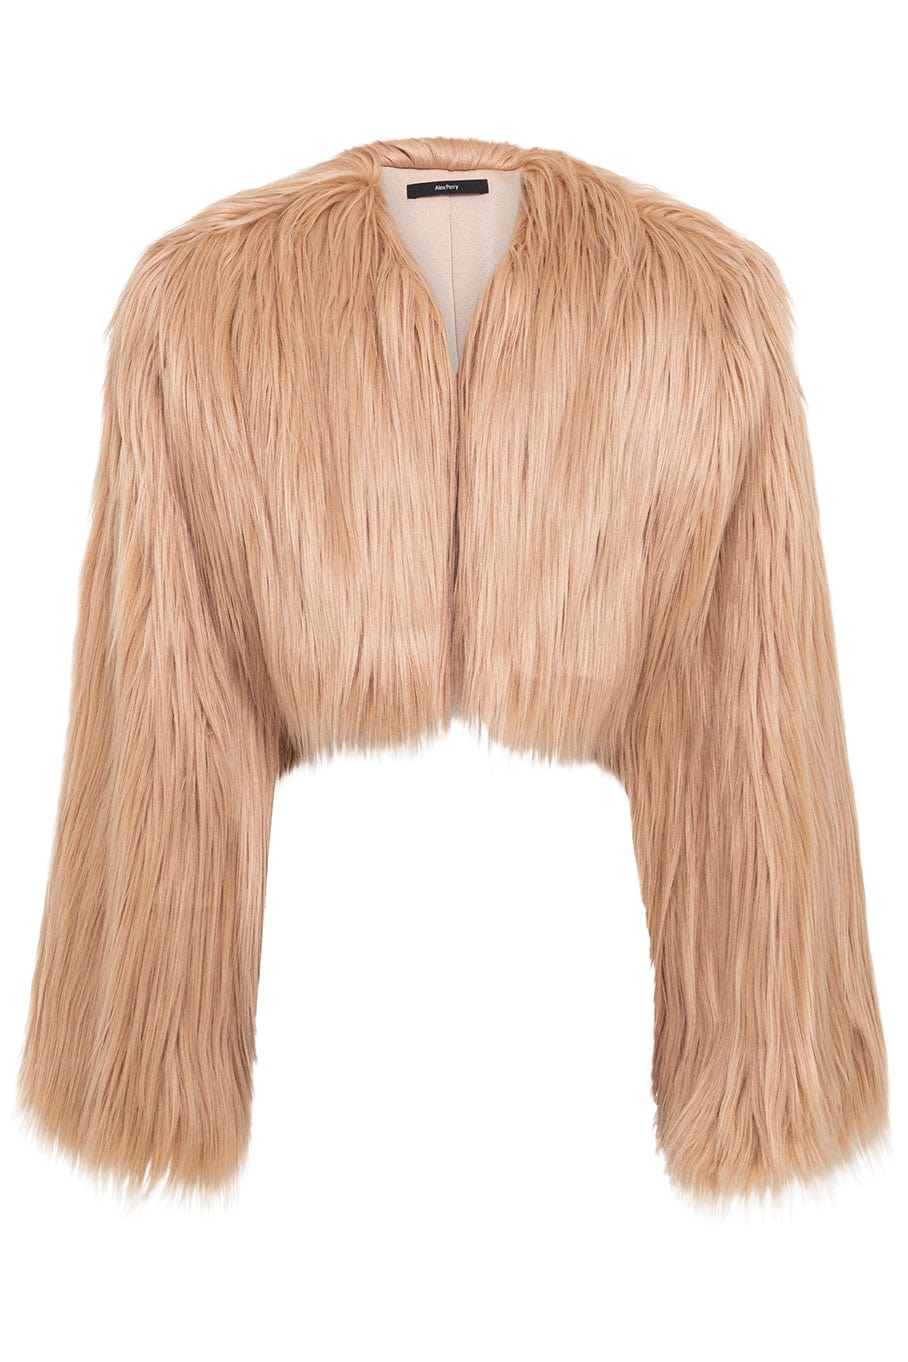 ALEX PERRY-Hutton Fur Cropped Jacket-